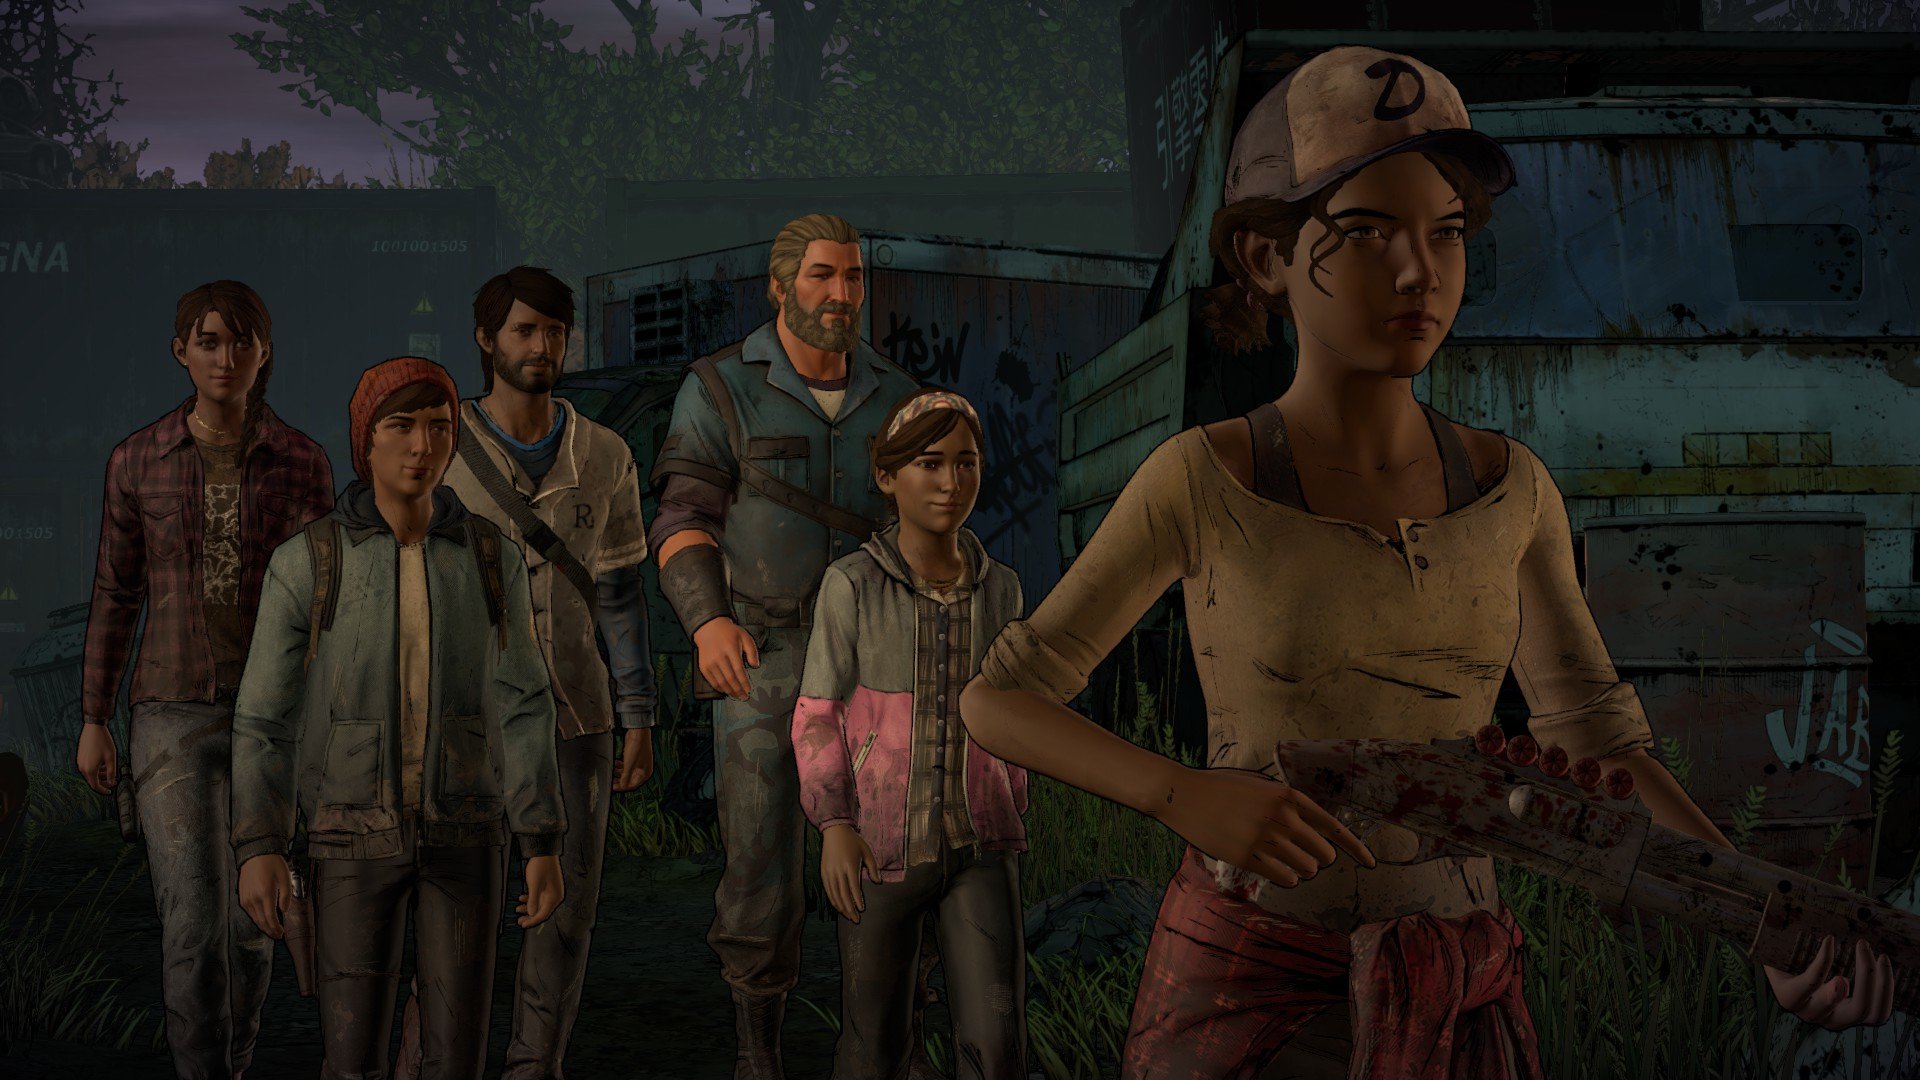 The Walking Dead: A New Frontier - Episode One: Ties That Bind Part I - The Walking Dead Game A New Frontier